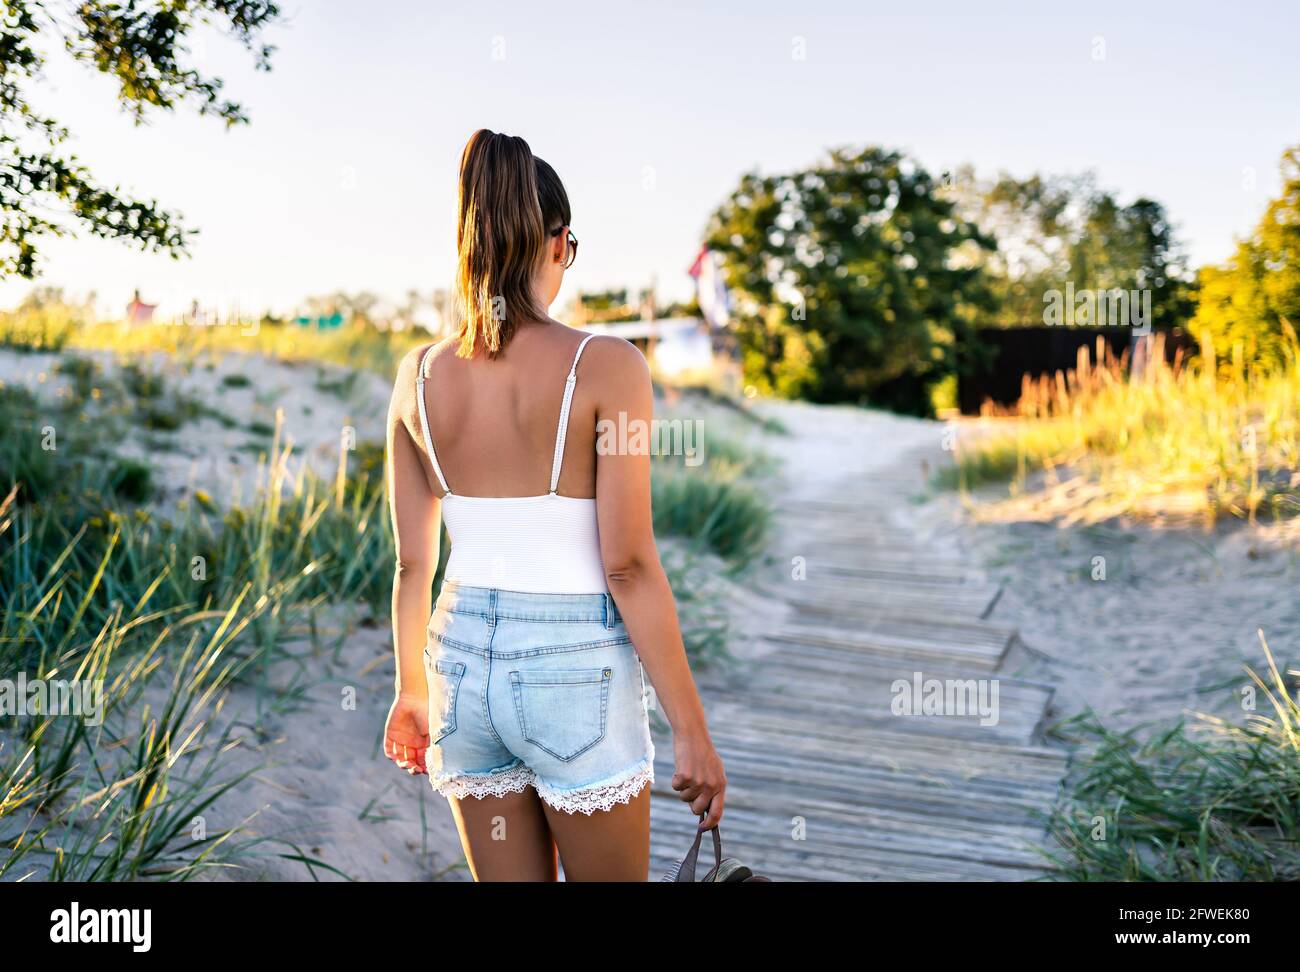 Summer tan on skin. Woman walking on boardwalk and leaving the beach. Stylish model wearing trendy jeans shorts. Hipster girl enjoying vacation. Stock Photo